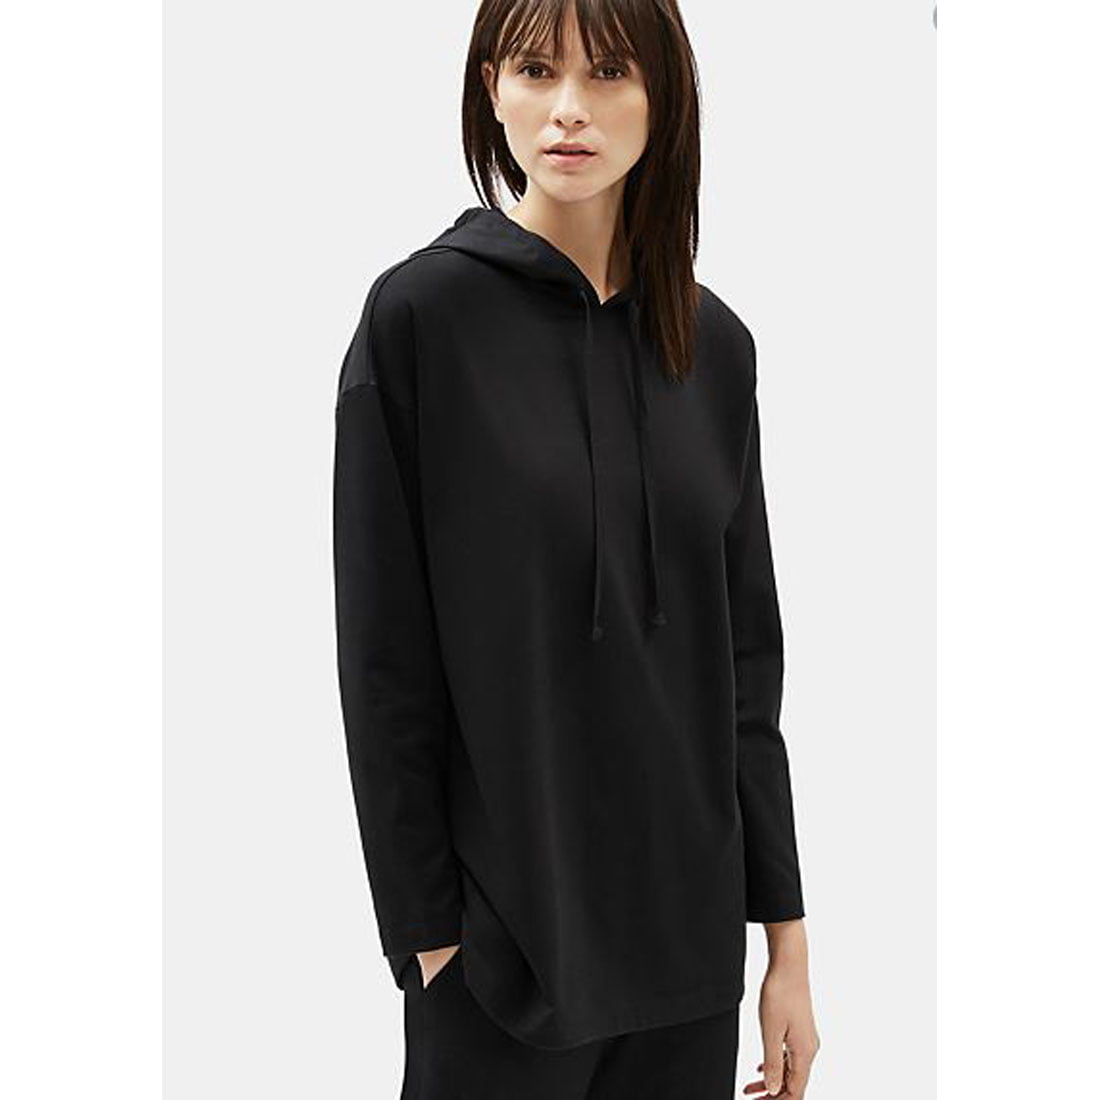 Eileen Fisher Organic Cotton Stretch Hooded Long Box Top, Black, Large ...